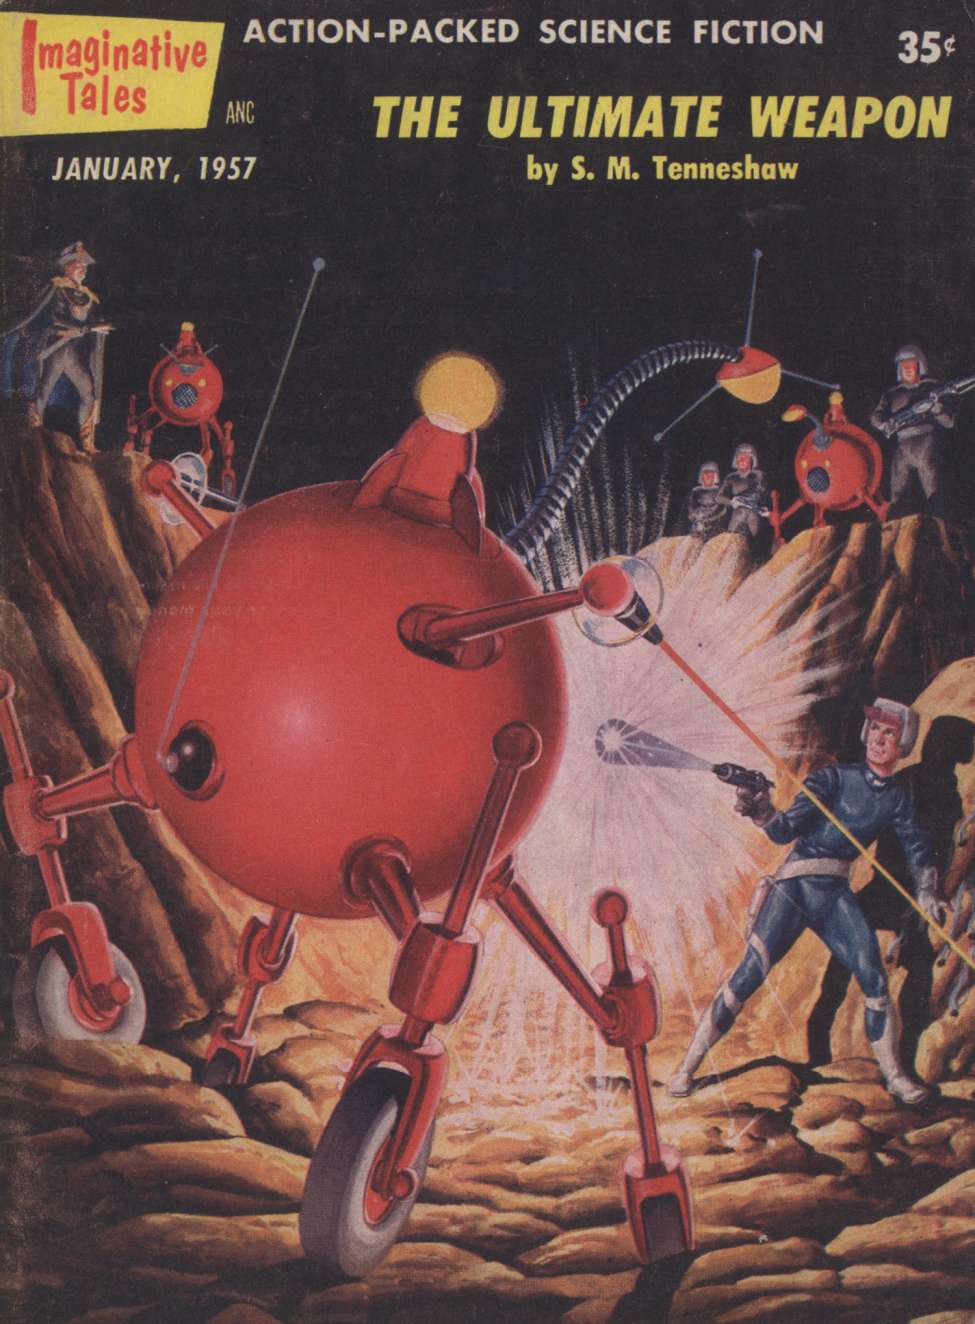 Comic Book Cover For Imaginative Tales v4 1 - The Ultimate Weapon - S. M. Tenneshaw